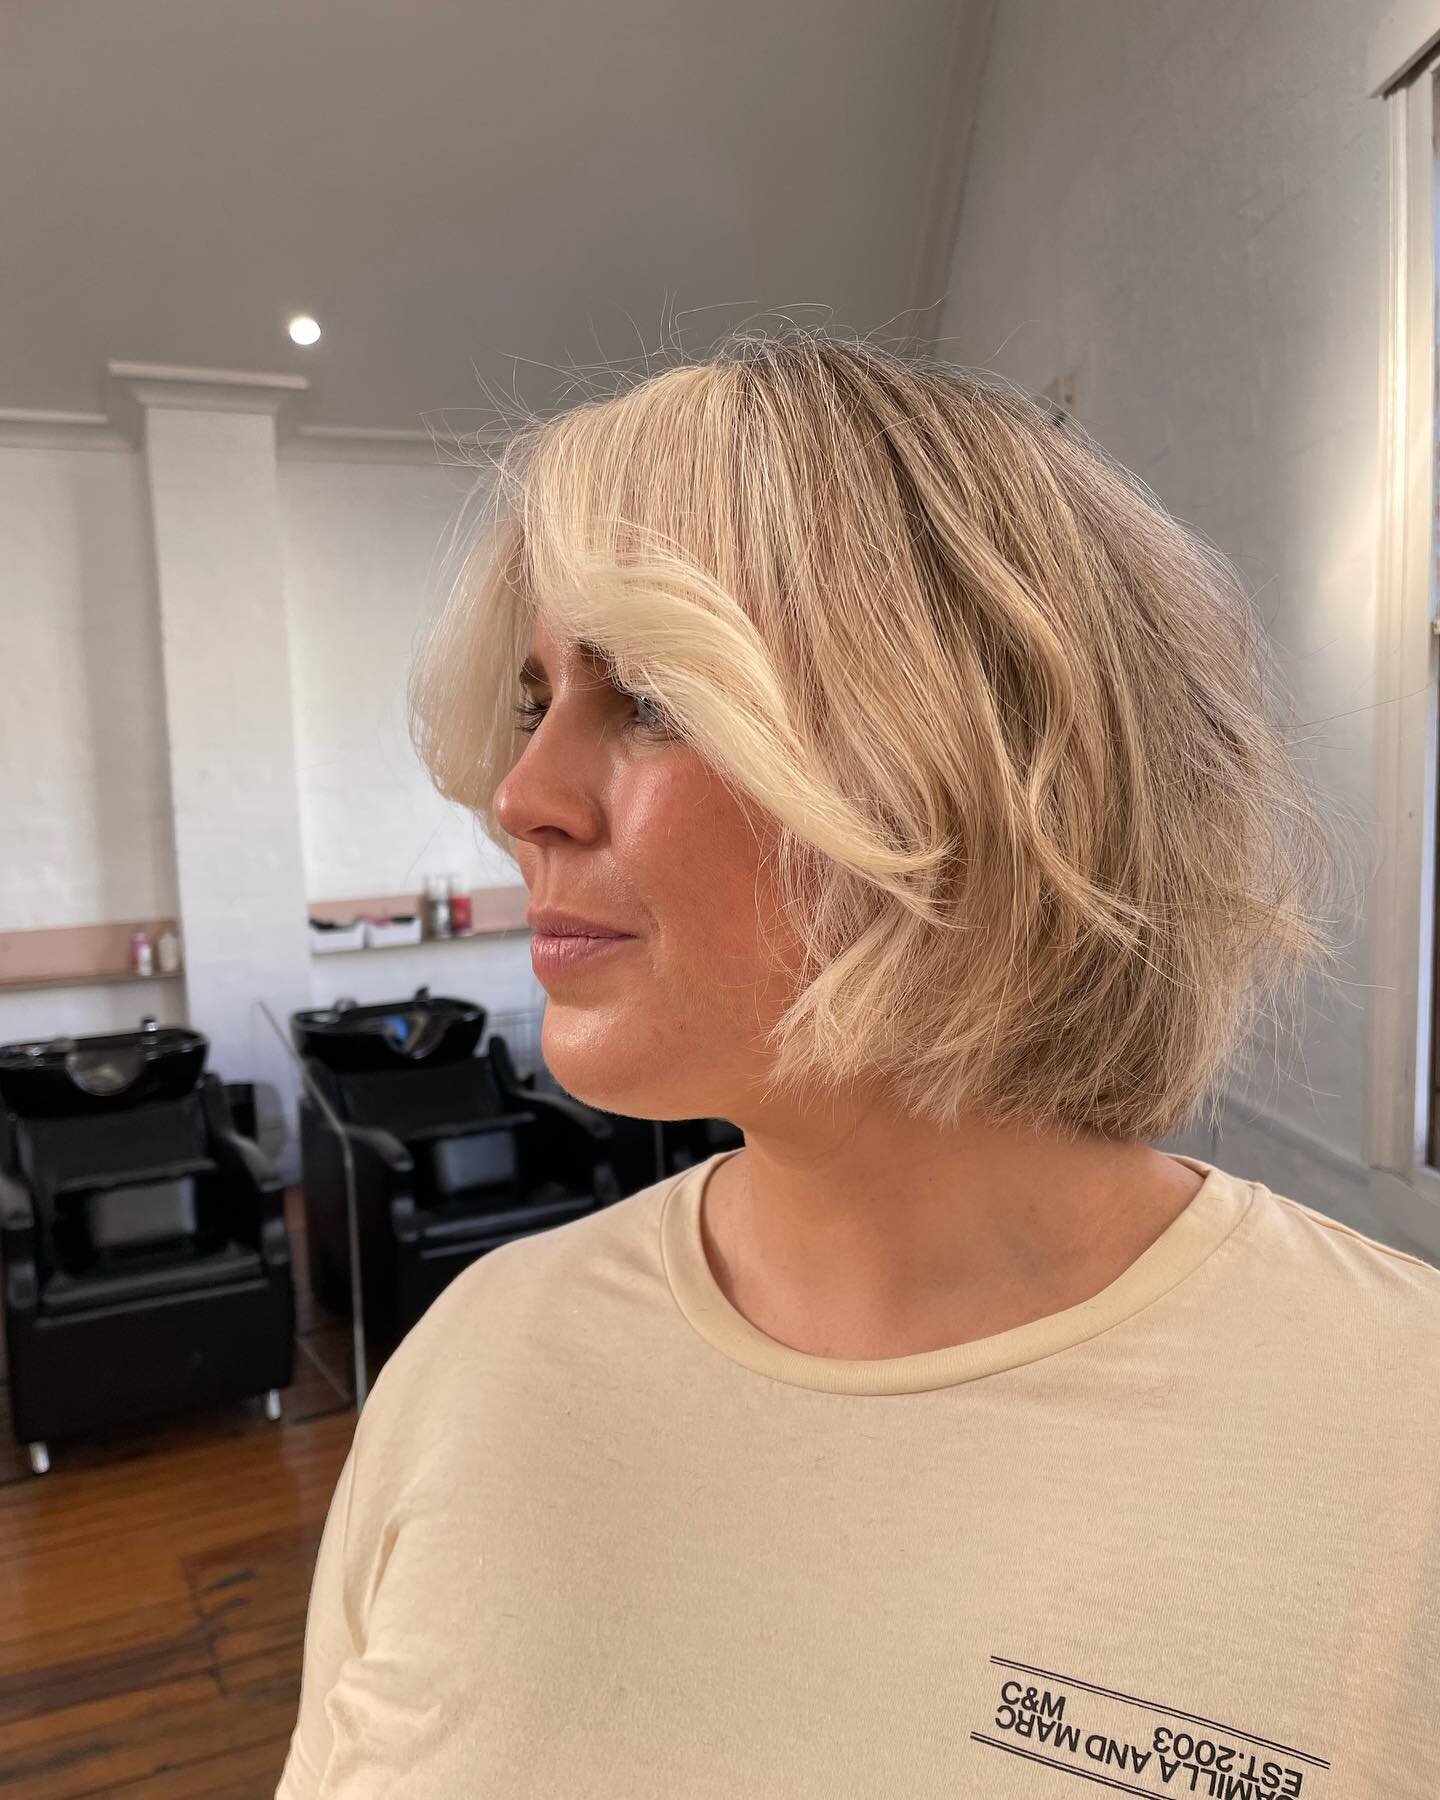 It&rsquo;s CHOP season ! ✂️✂️✂️
Over everything? Need a change ? Just chop it off or go PINK! 

#ddcohair #chopitoff #thisisyoursign #blondebob #bob #moneypiece